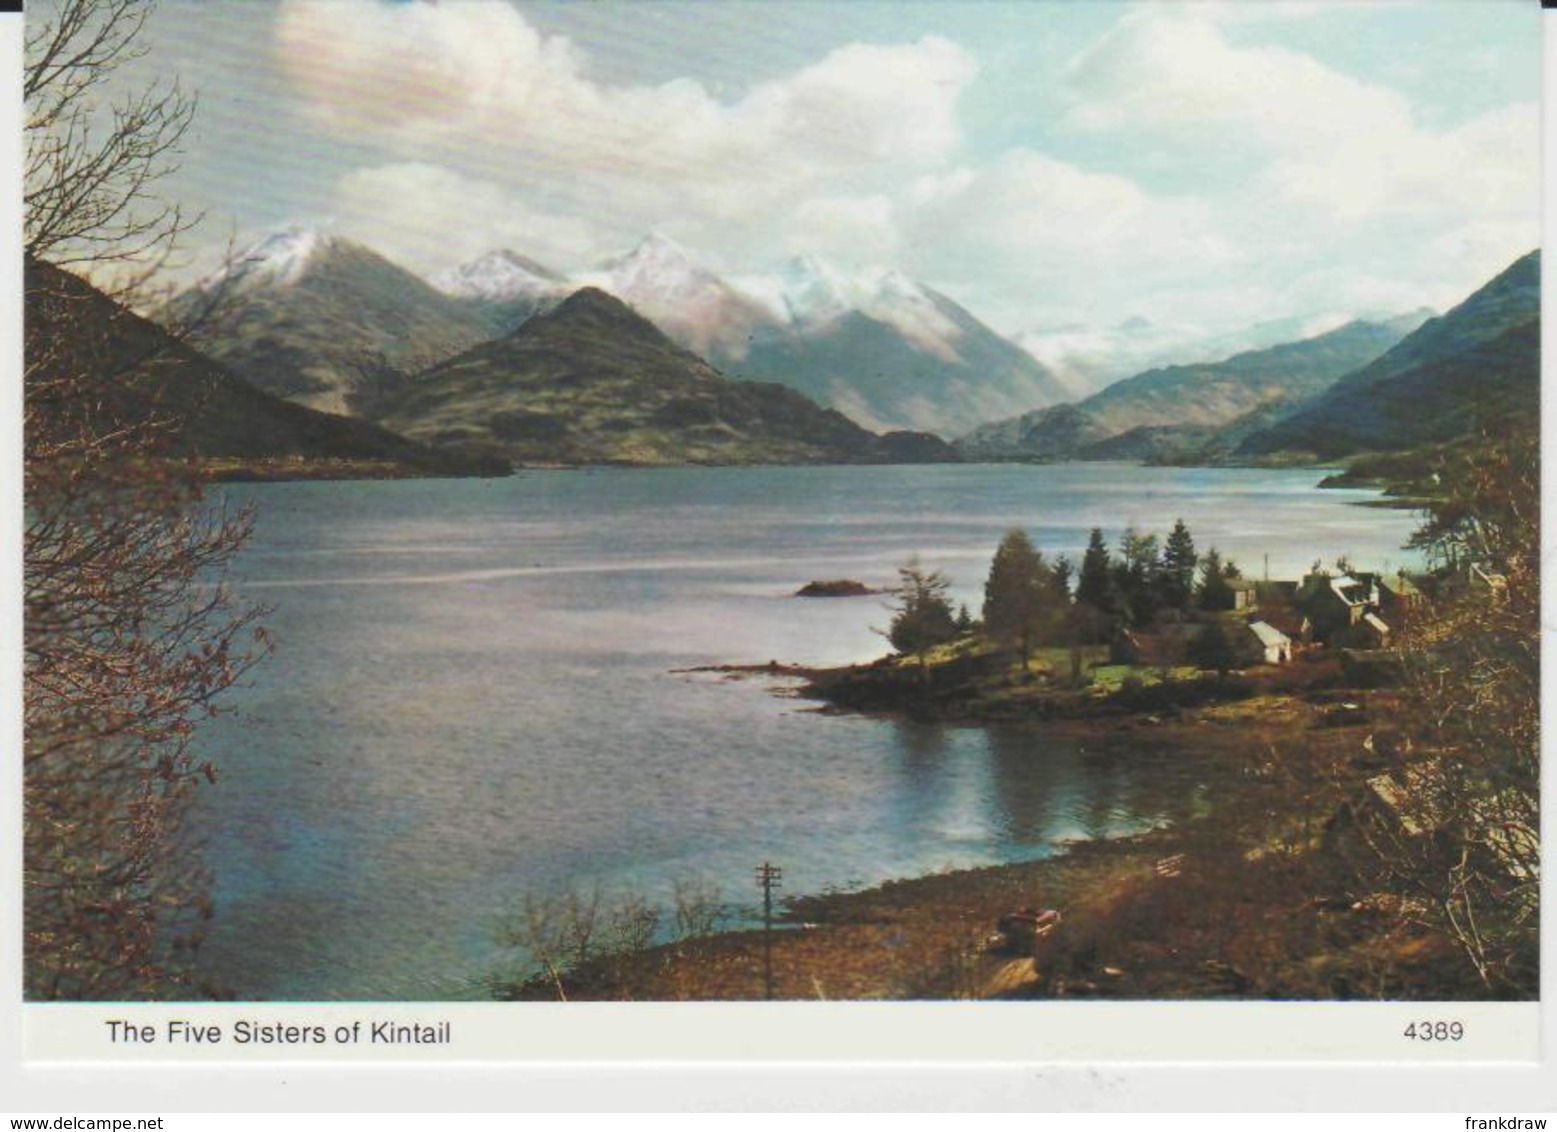 Postcard - The Five Sisters Of Kintail - Card No..4389 - Unused Very Good - Unclassified